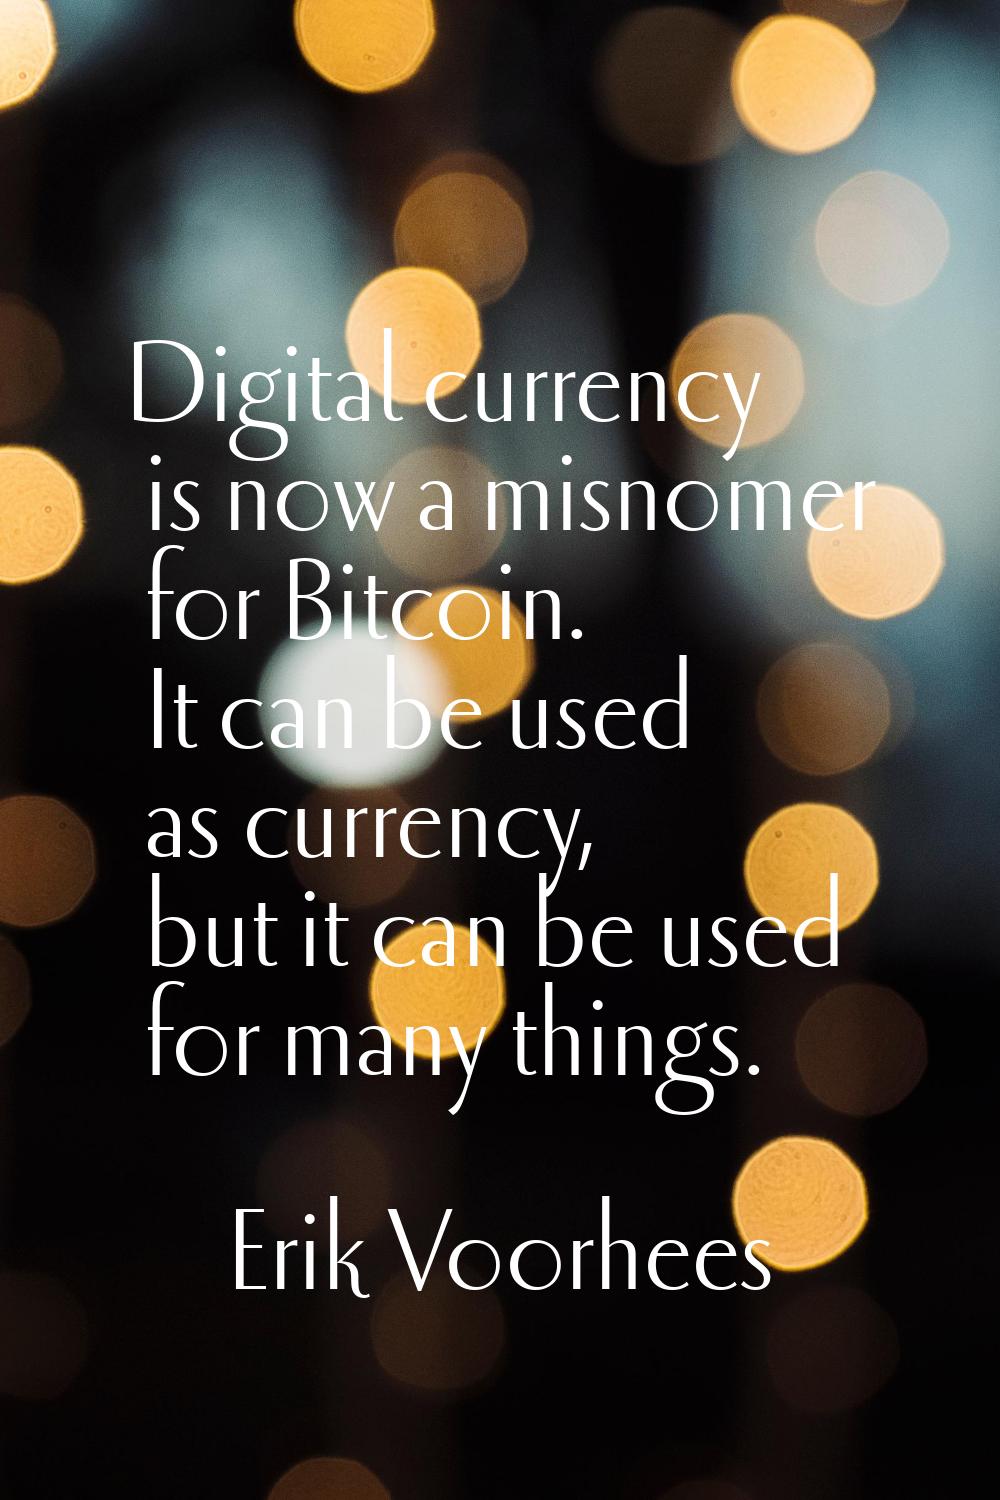 Digital currency is now a misnomer for Bitcoin. It can be used as currency, but it can be used for 